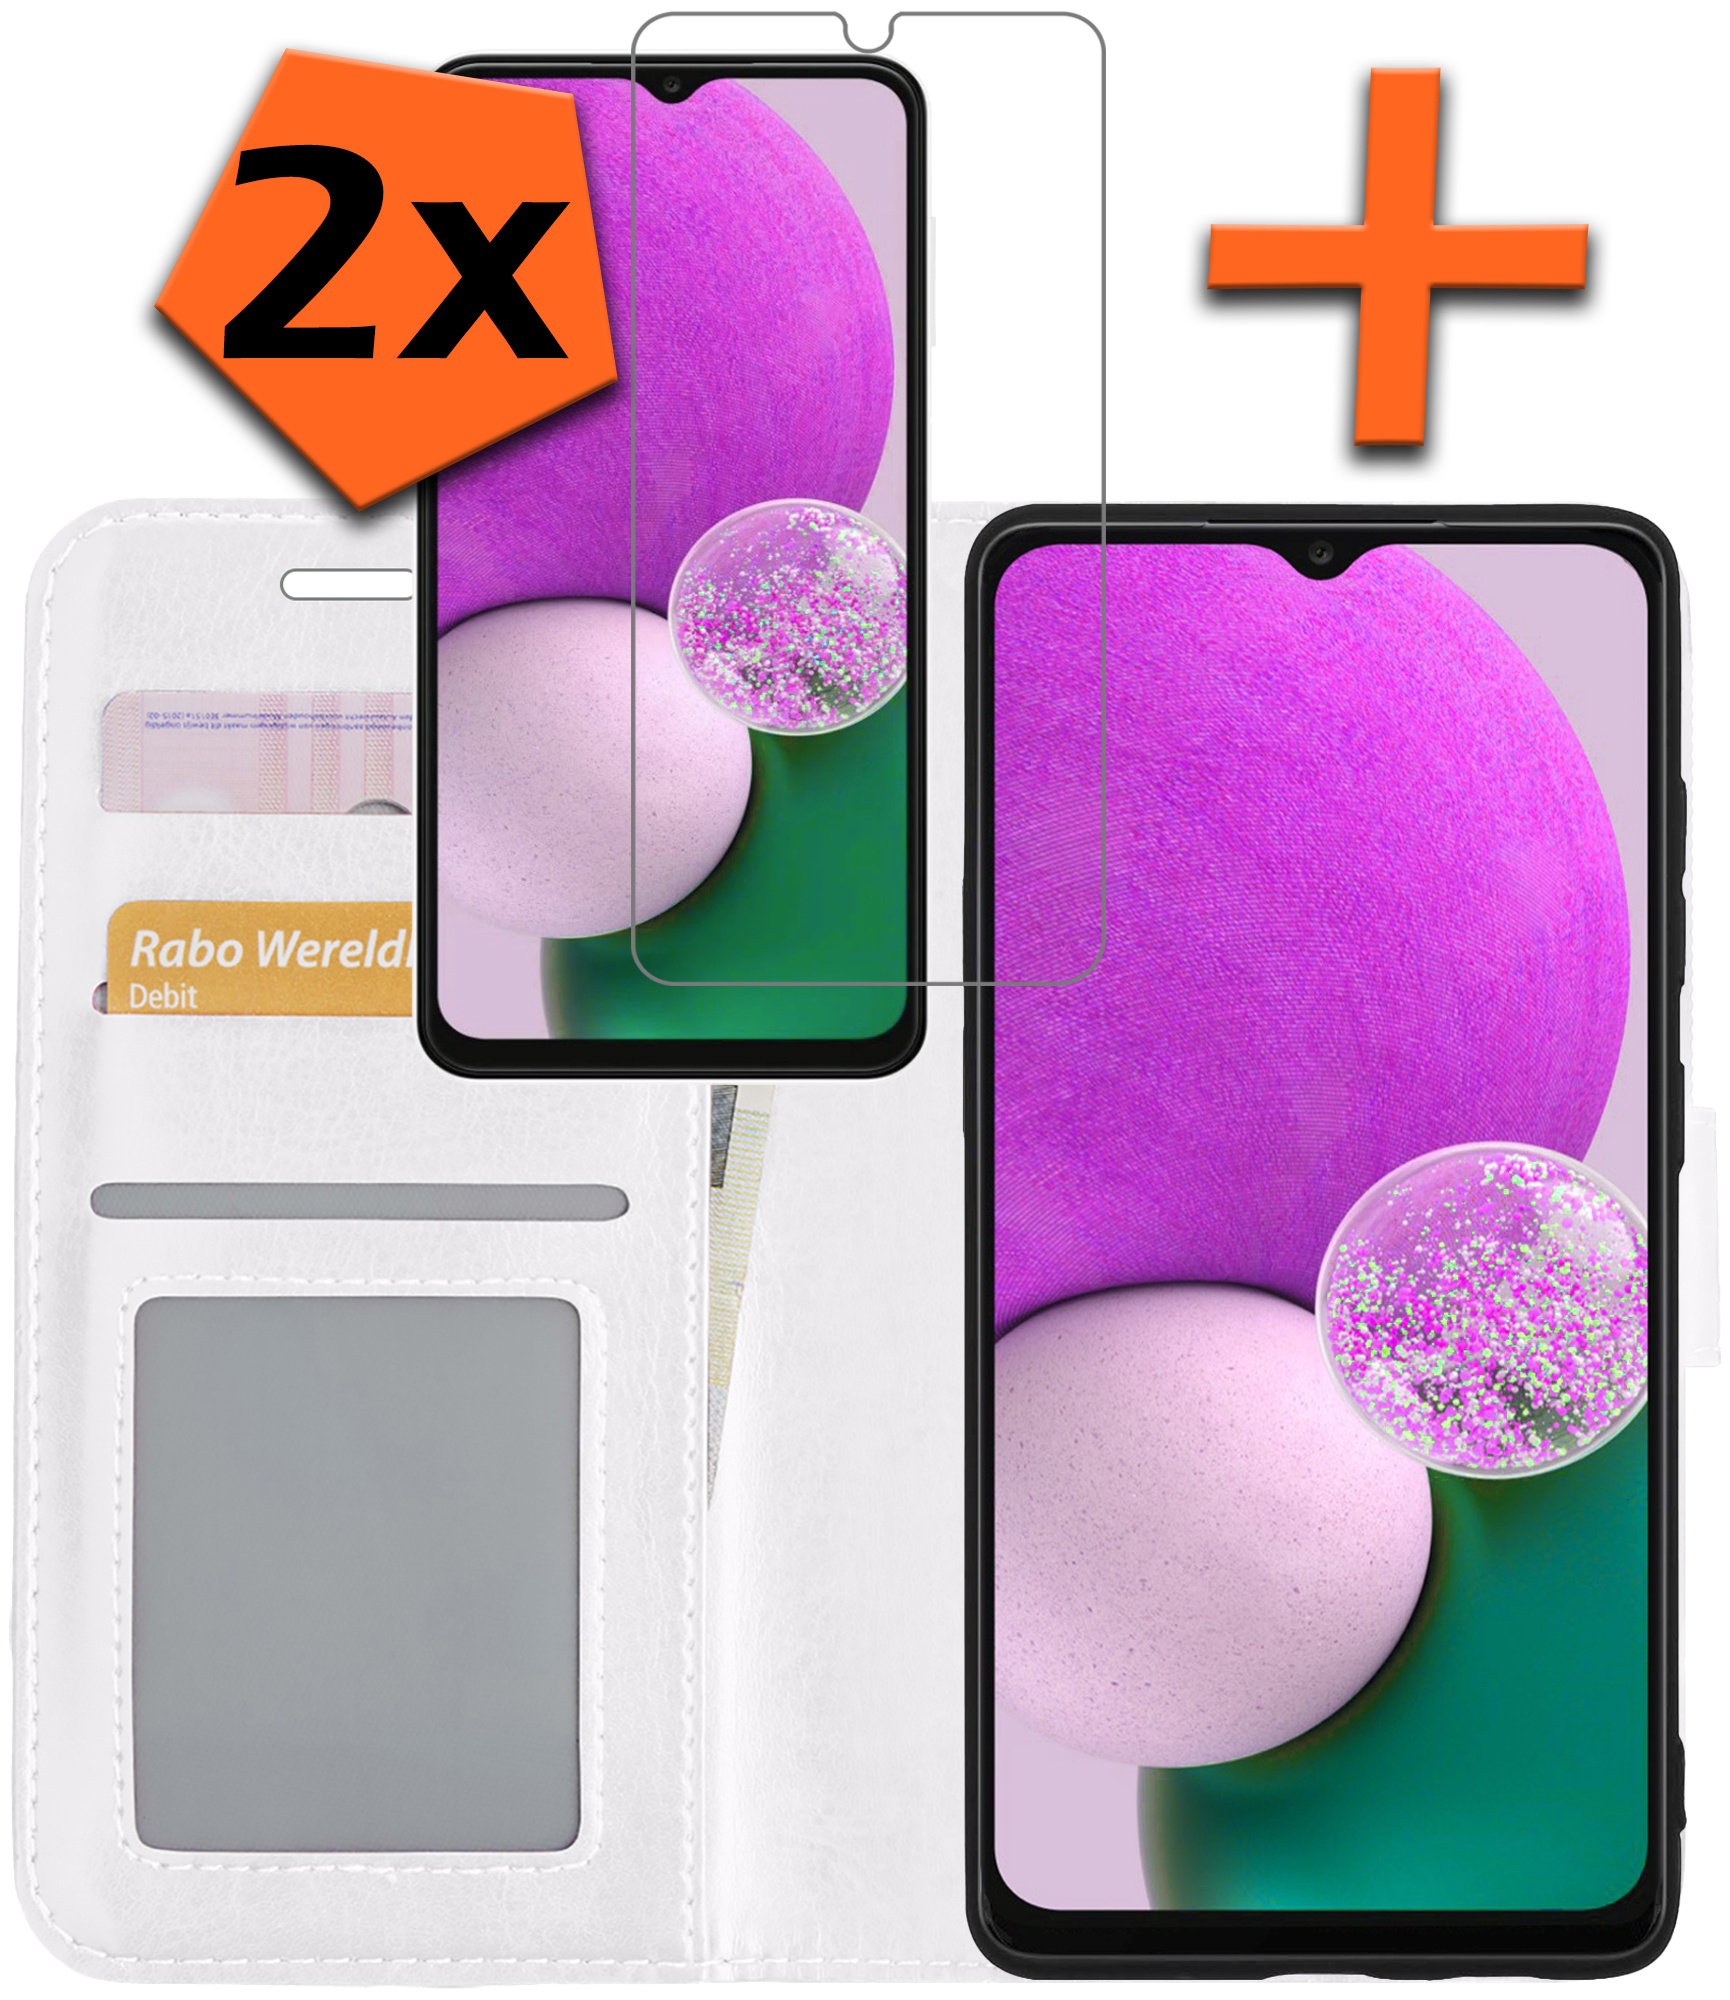 Nomfy Samsung Galaxy A13 4G Hoesje Bookcase Met 2x Screenprotector - Samsung Galaxy A13 4G Screenprotector 2x - Samsung Galaxy A13 4G Book Case Met 2x Screenprotector Wit